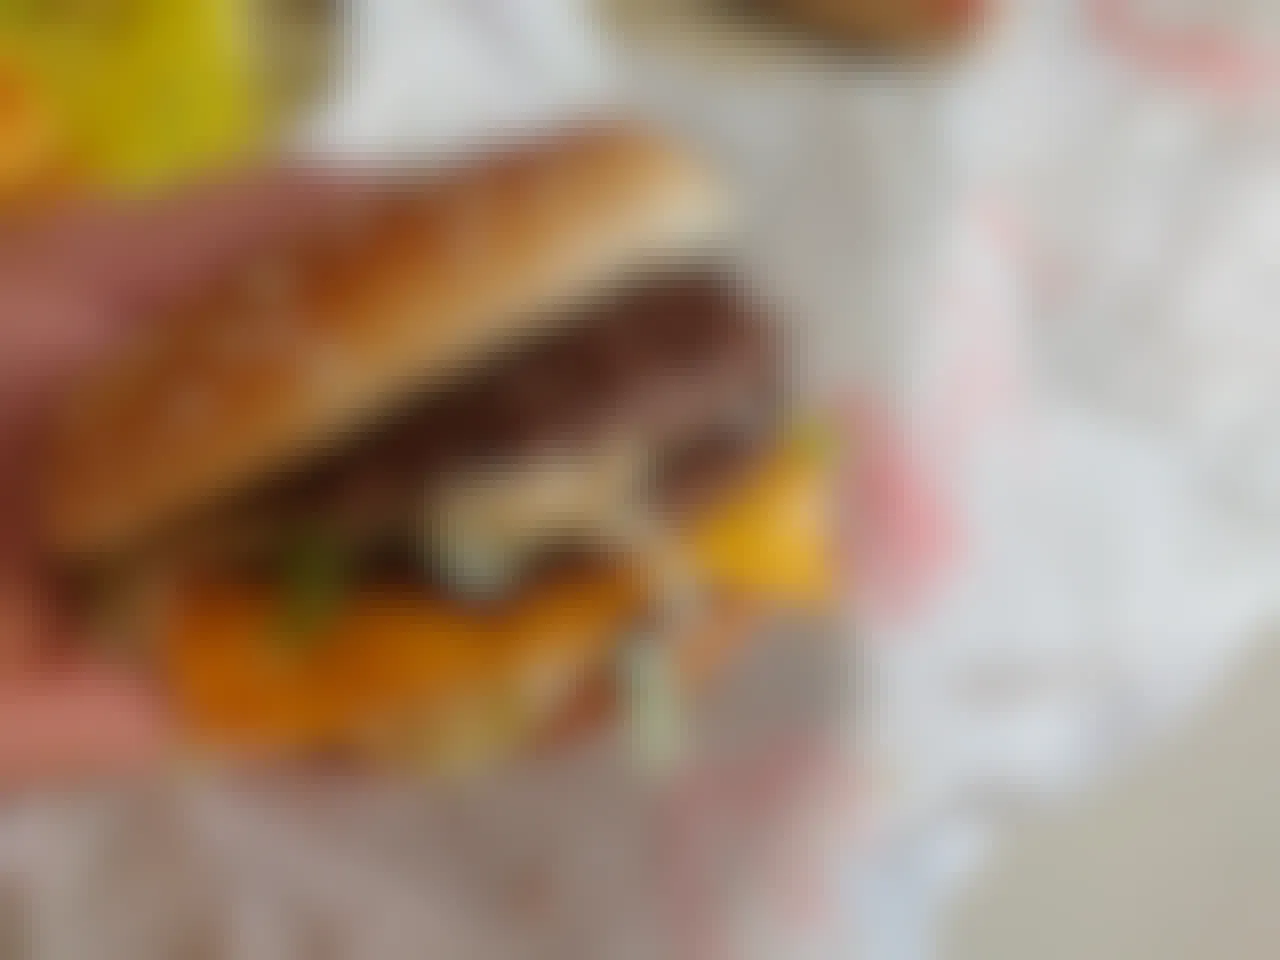 A person's hand holding a burger from McDonald's above the paper wrapper on the table.